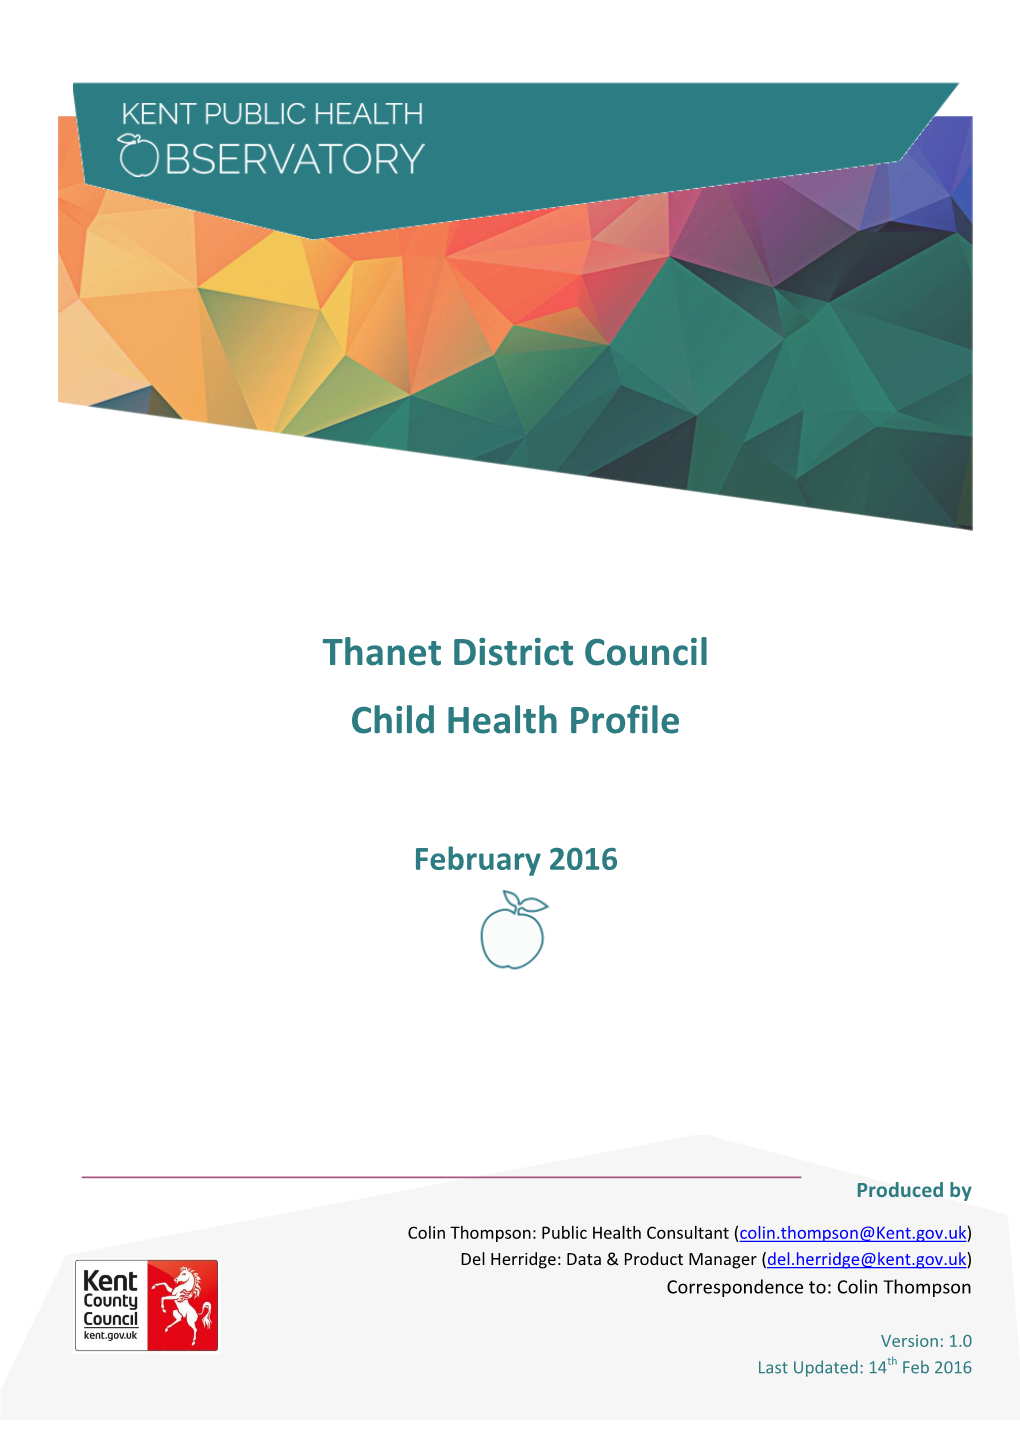 Thanet District Council Child Health Profile